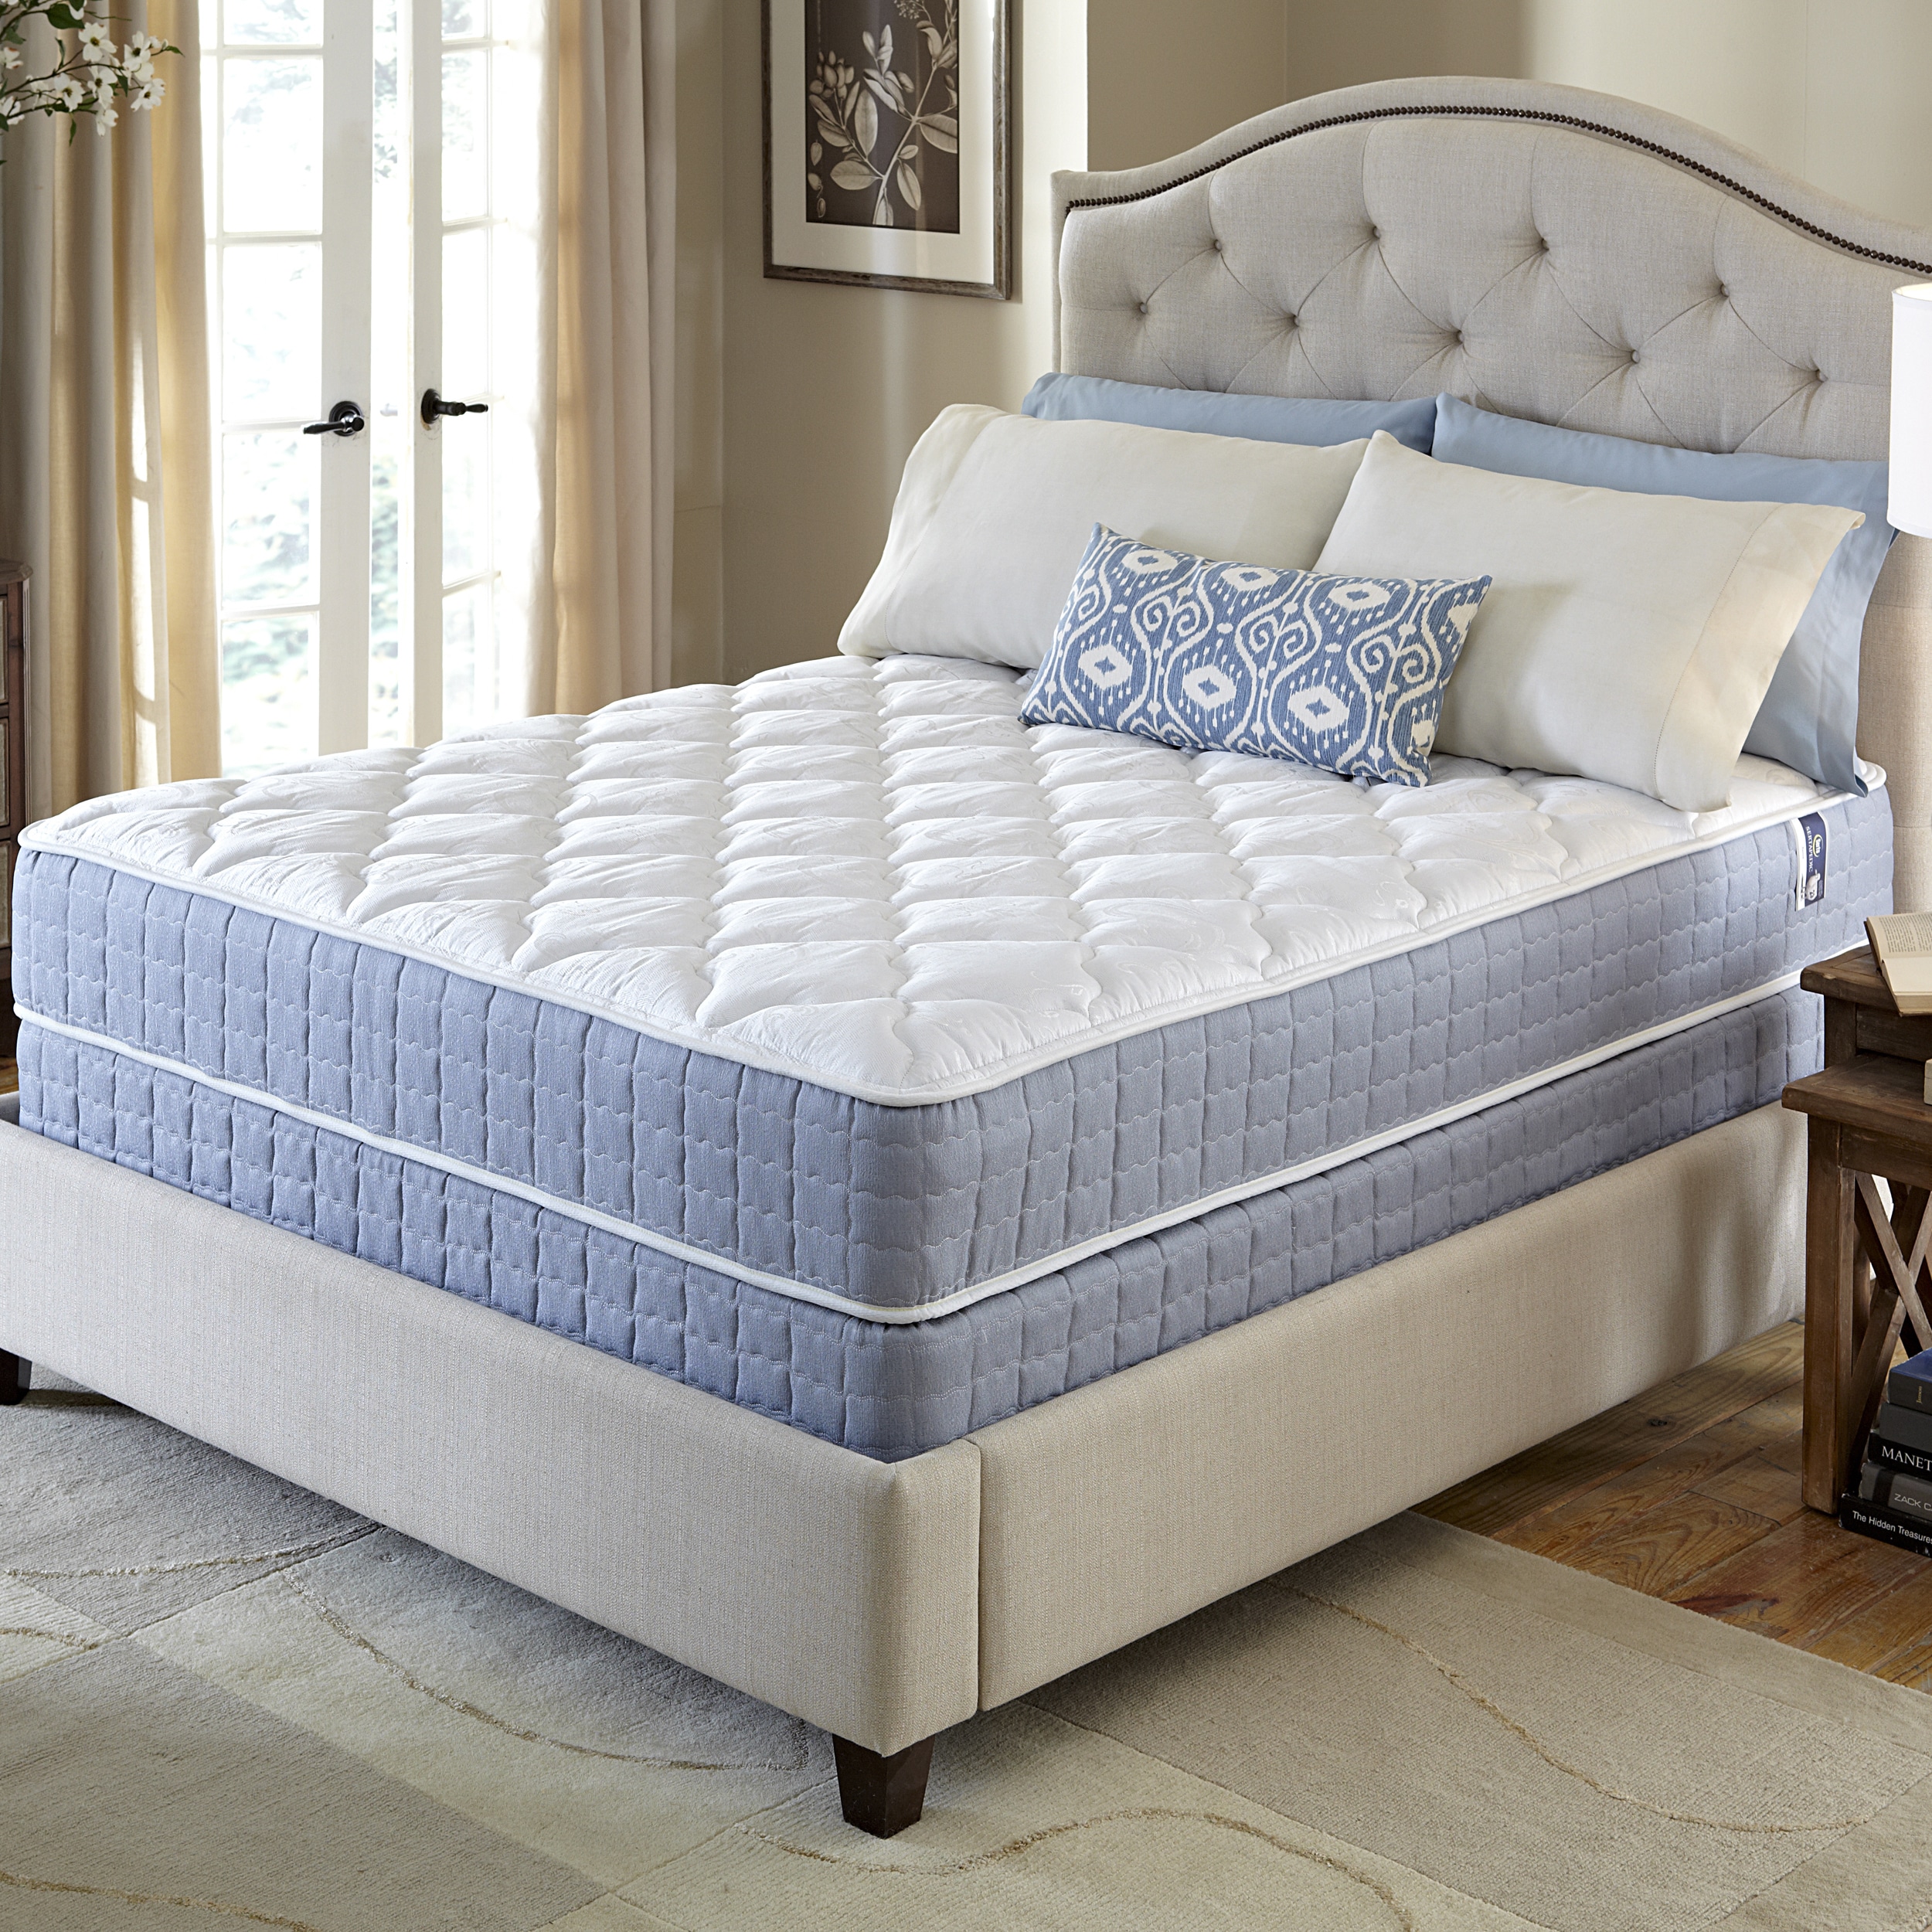 Serta Revival Firm Twin Size Mattress and Foundation Set Compare $420